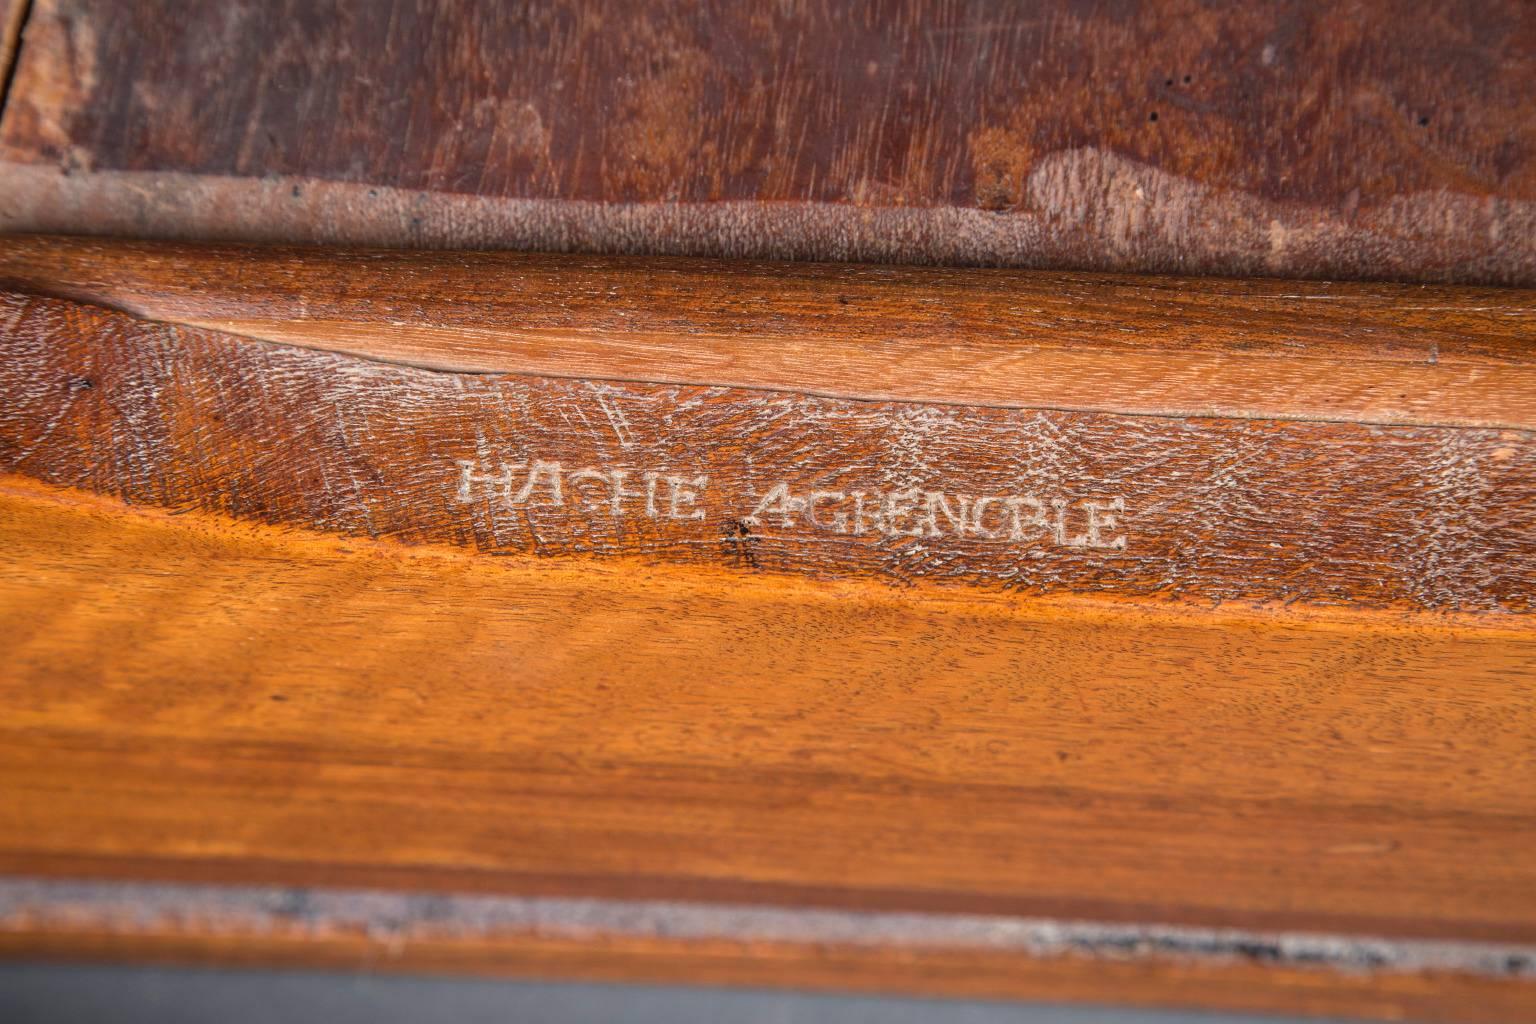 French 18th Century Louis XV Expanding Game Table, Signed “Hache a Grenoble” For Sale 5